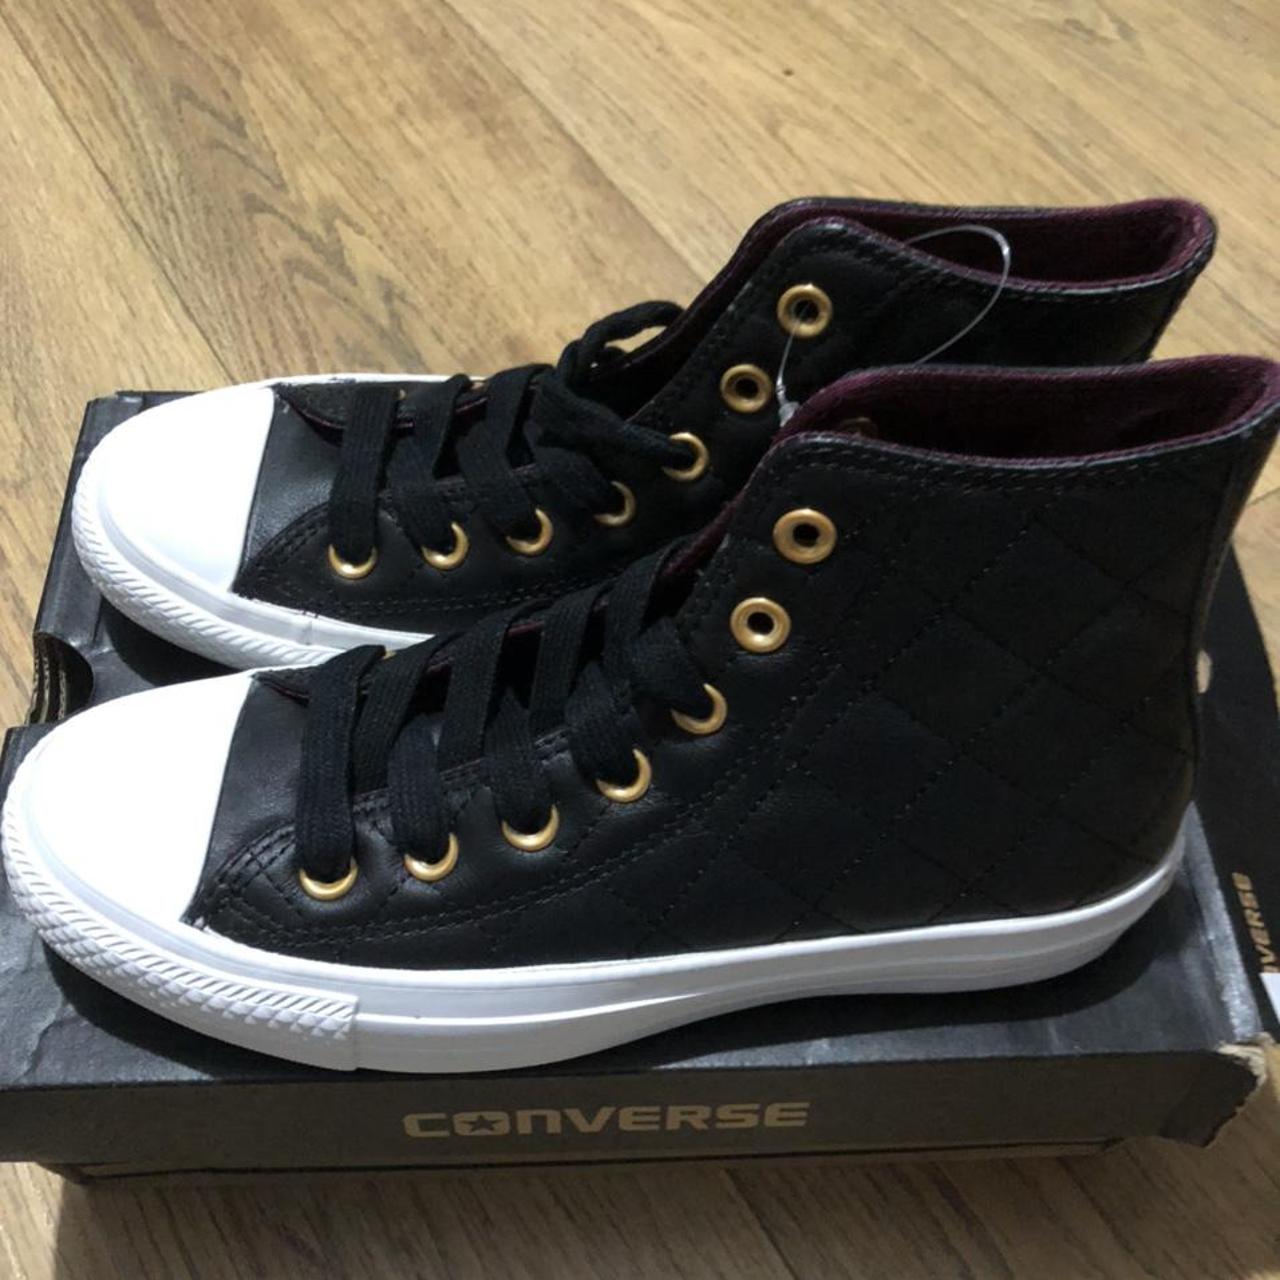 Product Image 1 - Womens size 4 Converse chuck